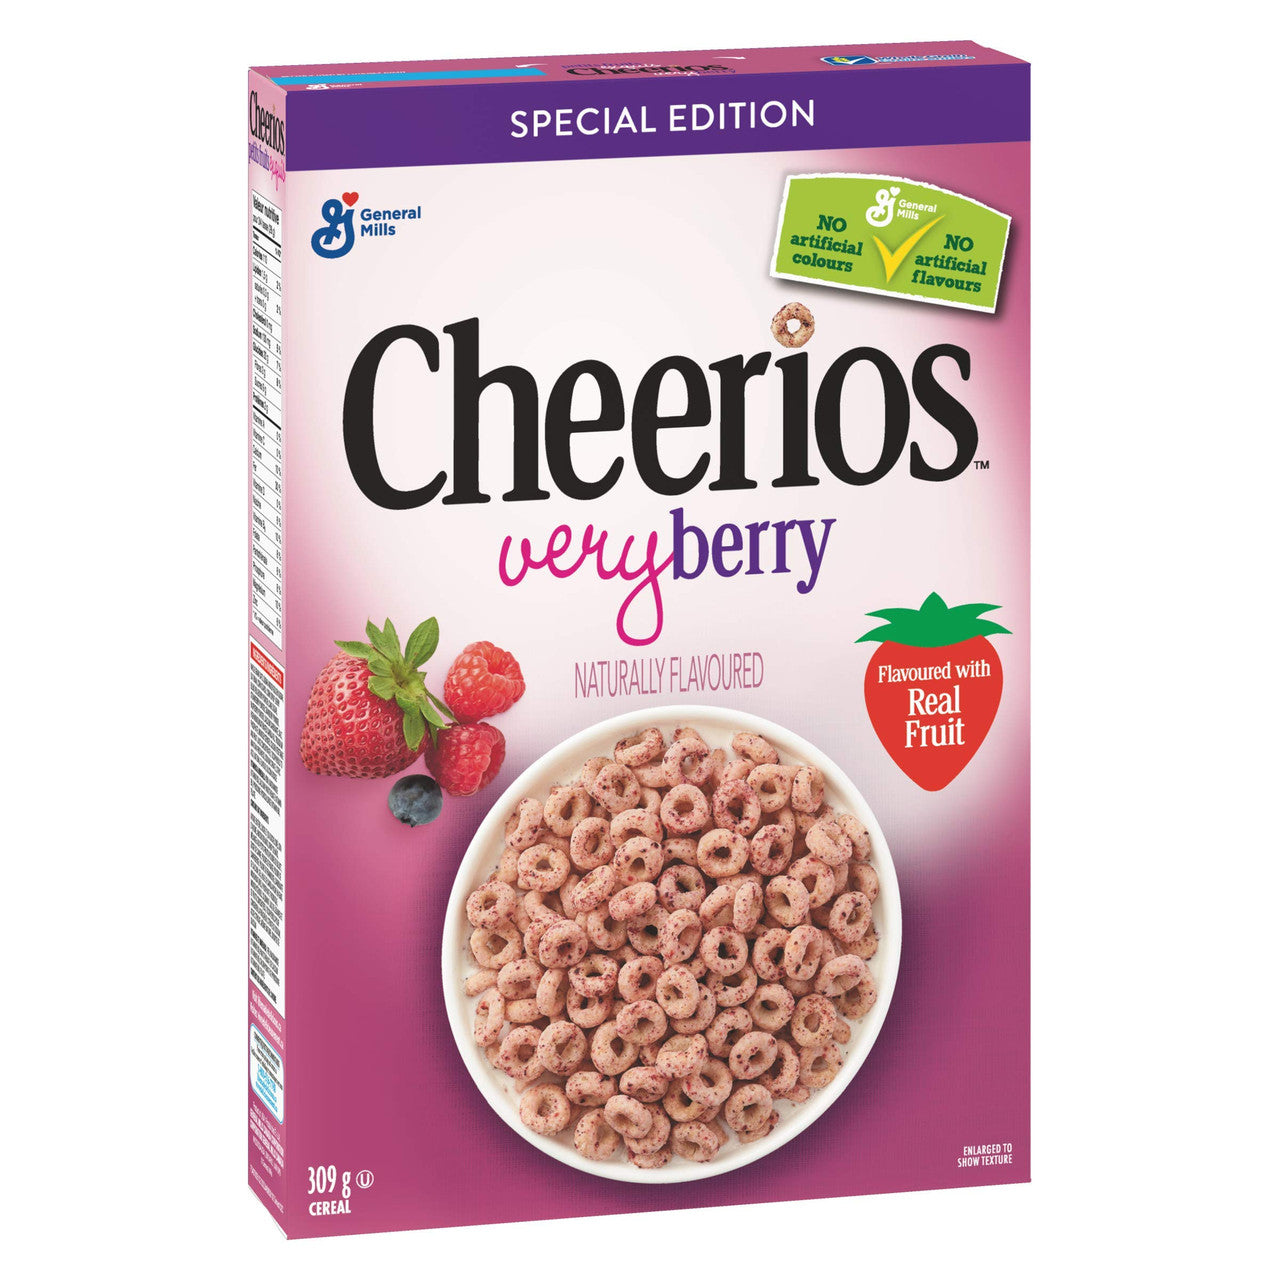 CHEERIOS Very Berry Naturally Flavored Cereal Special Edition, 309g/11oz. (Imported from Canada)